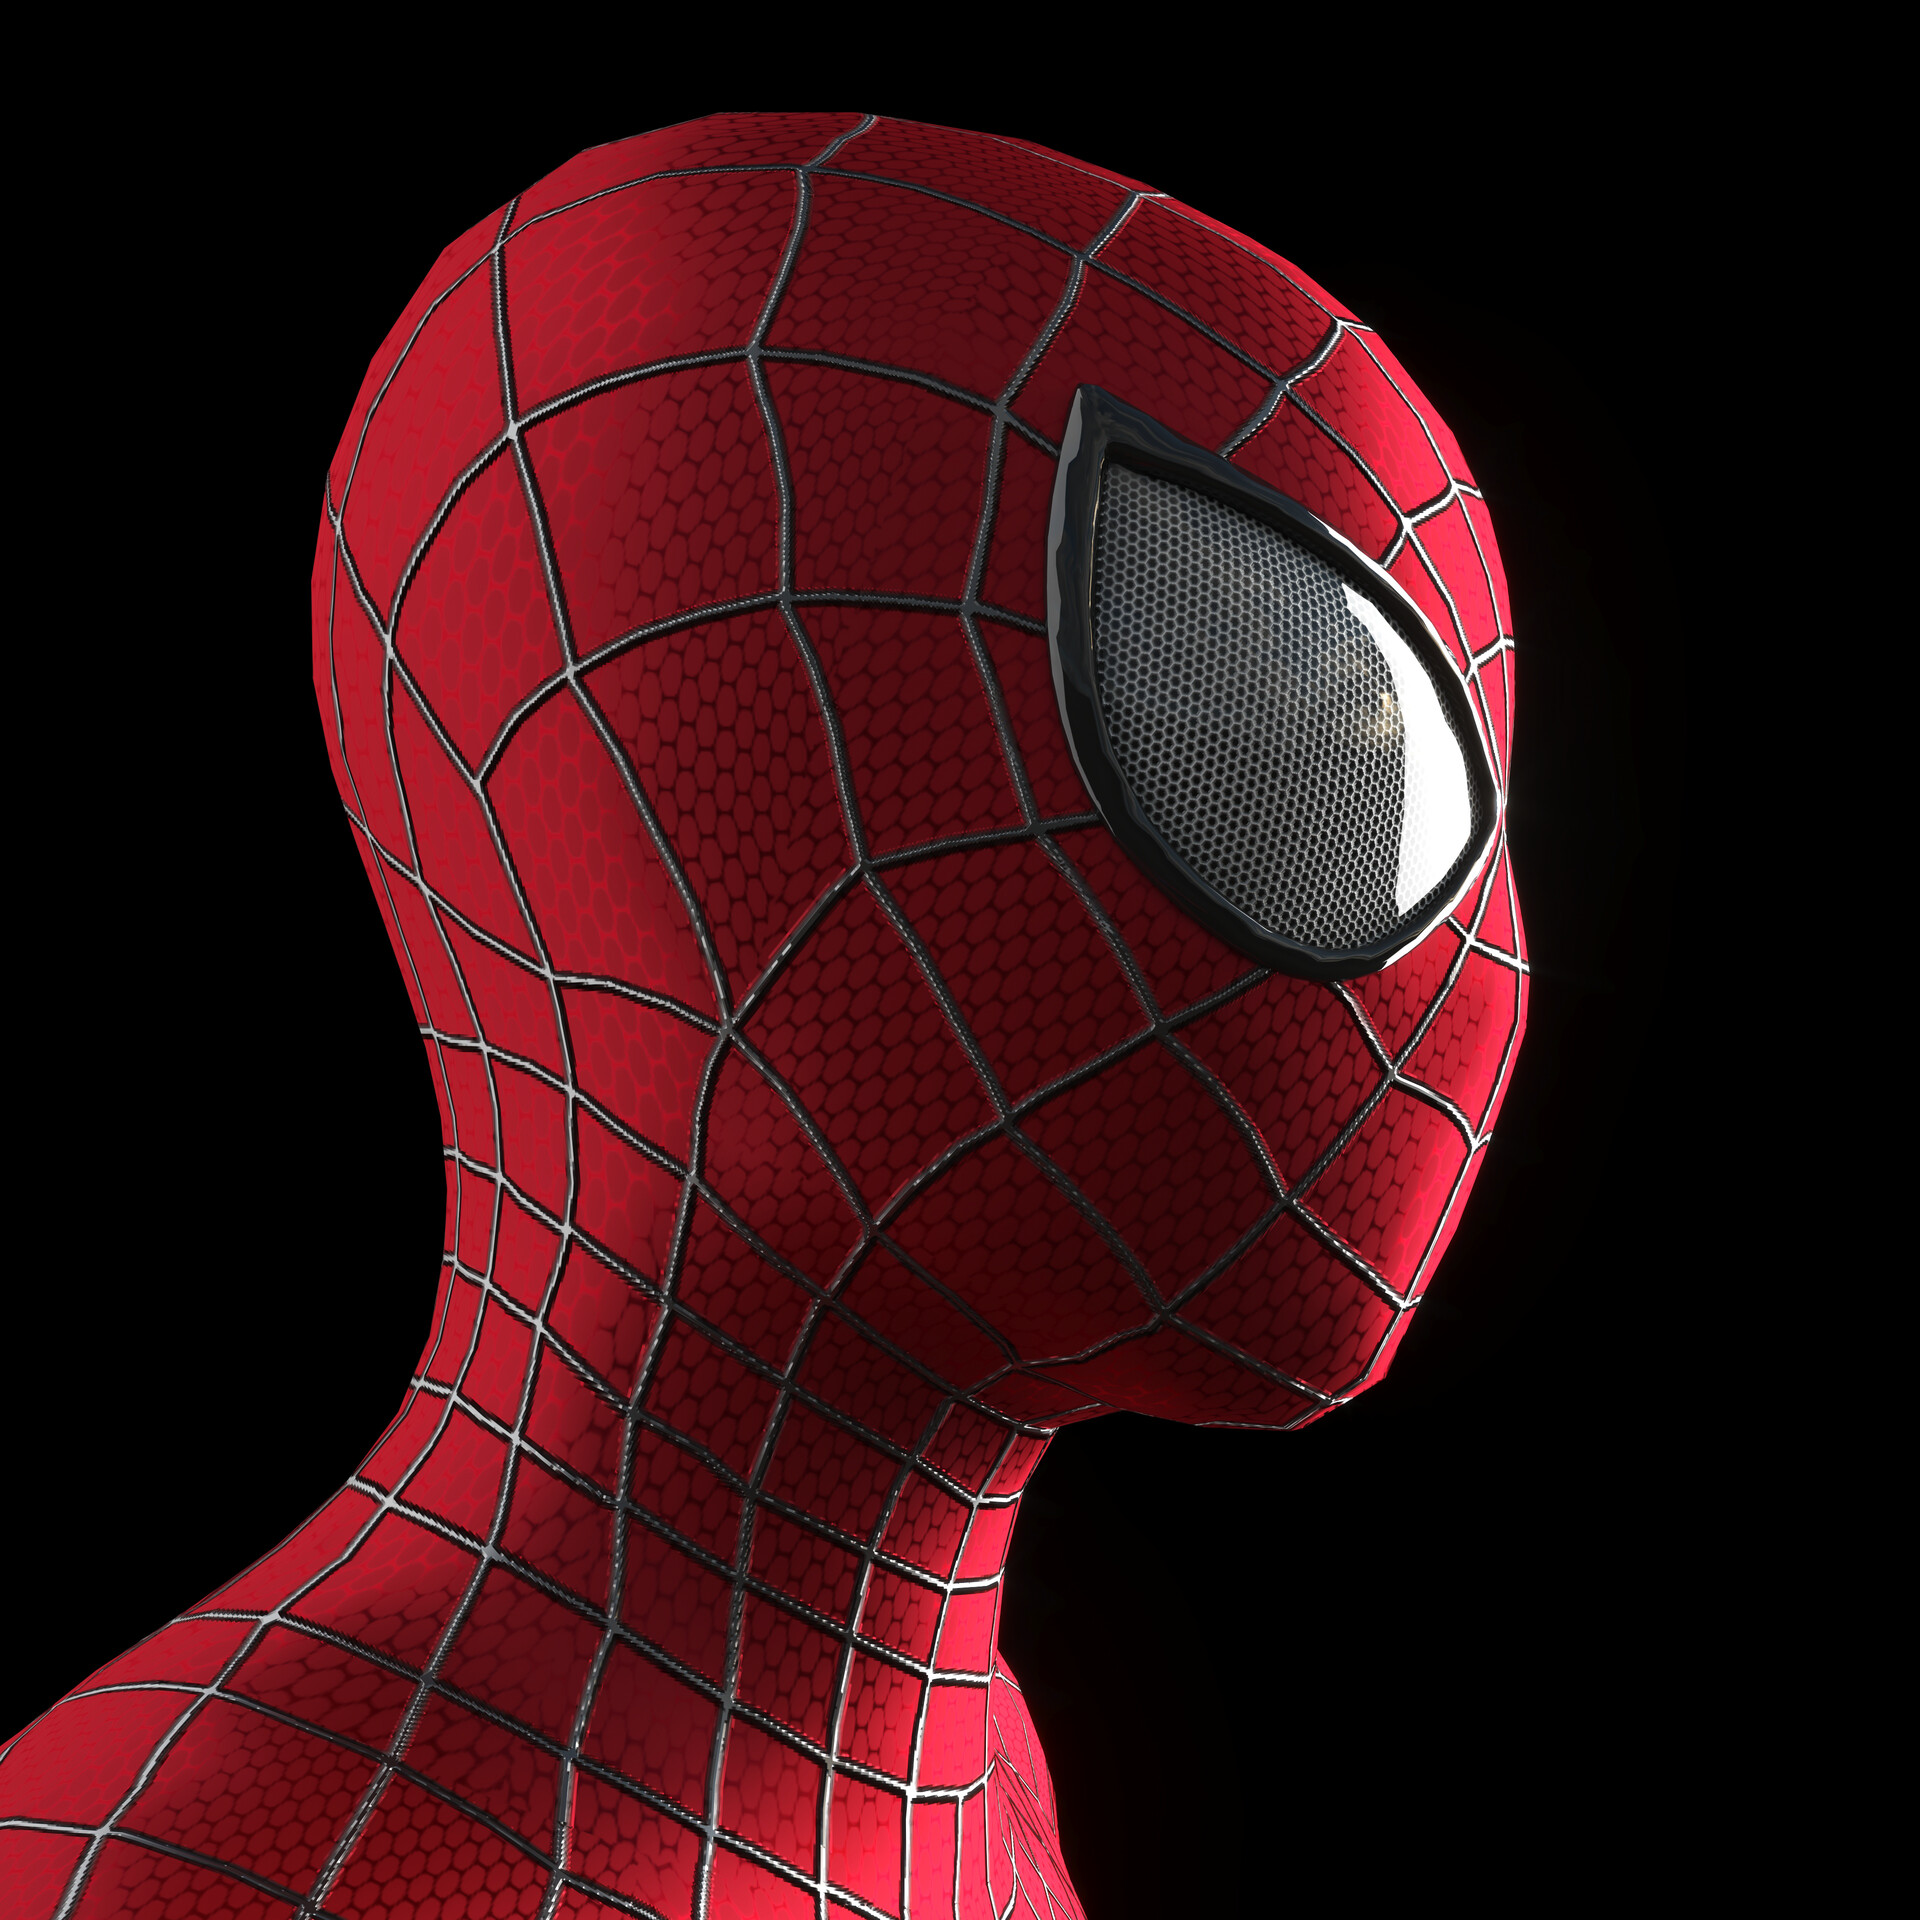 Tips The Amazing Spider man 2 APK pour Android Télécharger